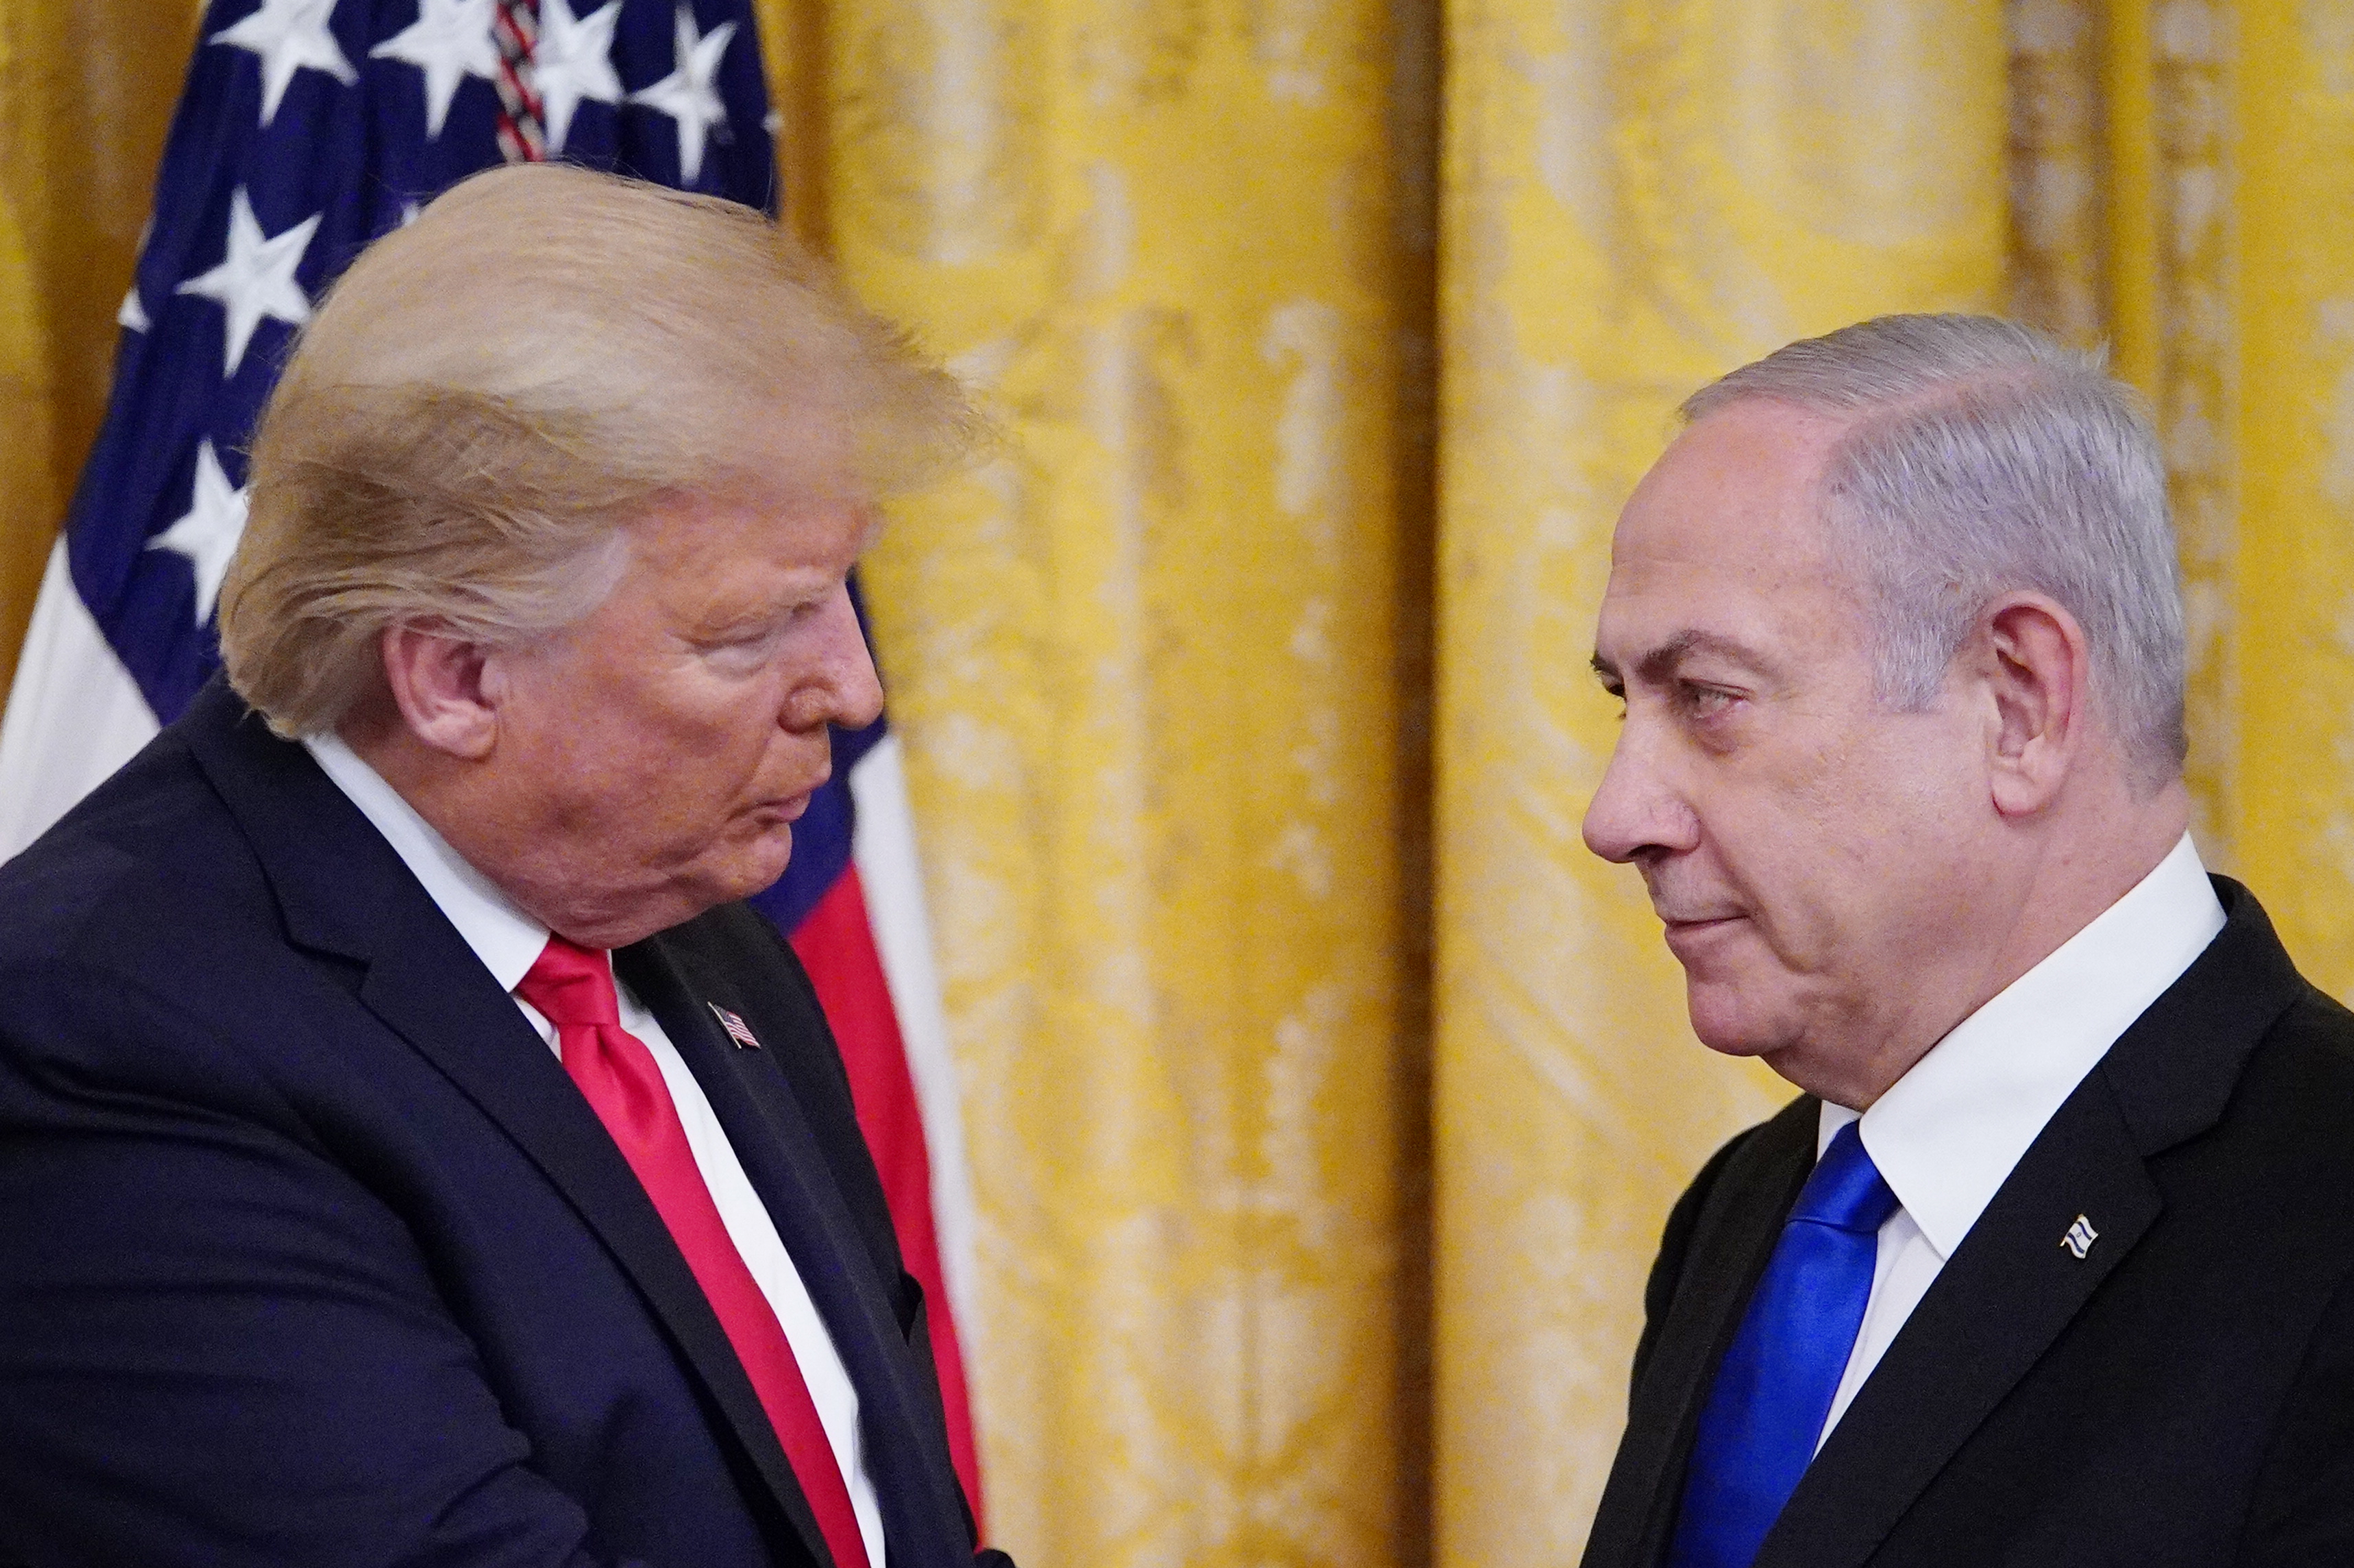 US President Donald Trump and Israel's Prime Minister Benjamin Netanyahu in the East Room of the White House in Washington, DC on 28 January (AFP)